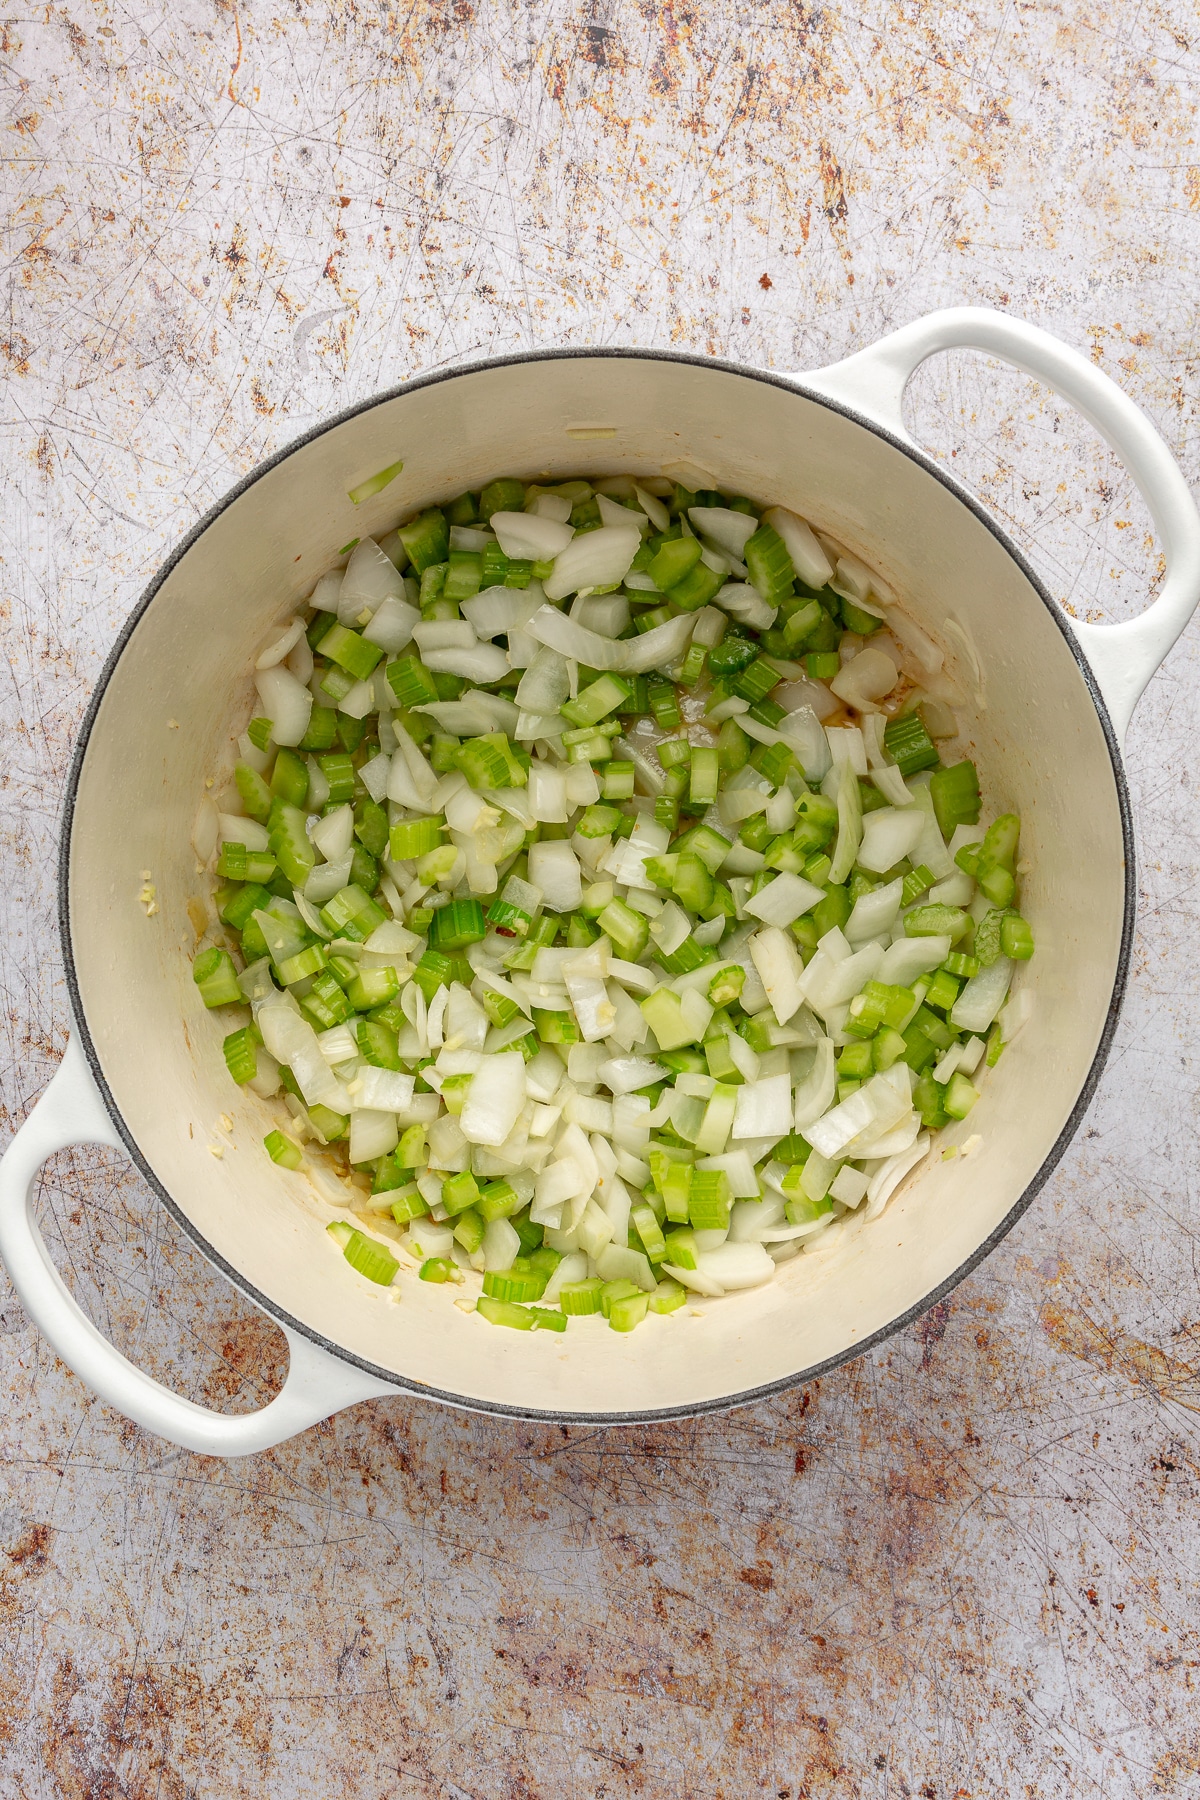 Chopped onion and celery has been added on top of th bacon in the white enameled pot.